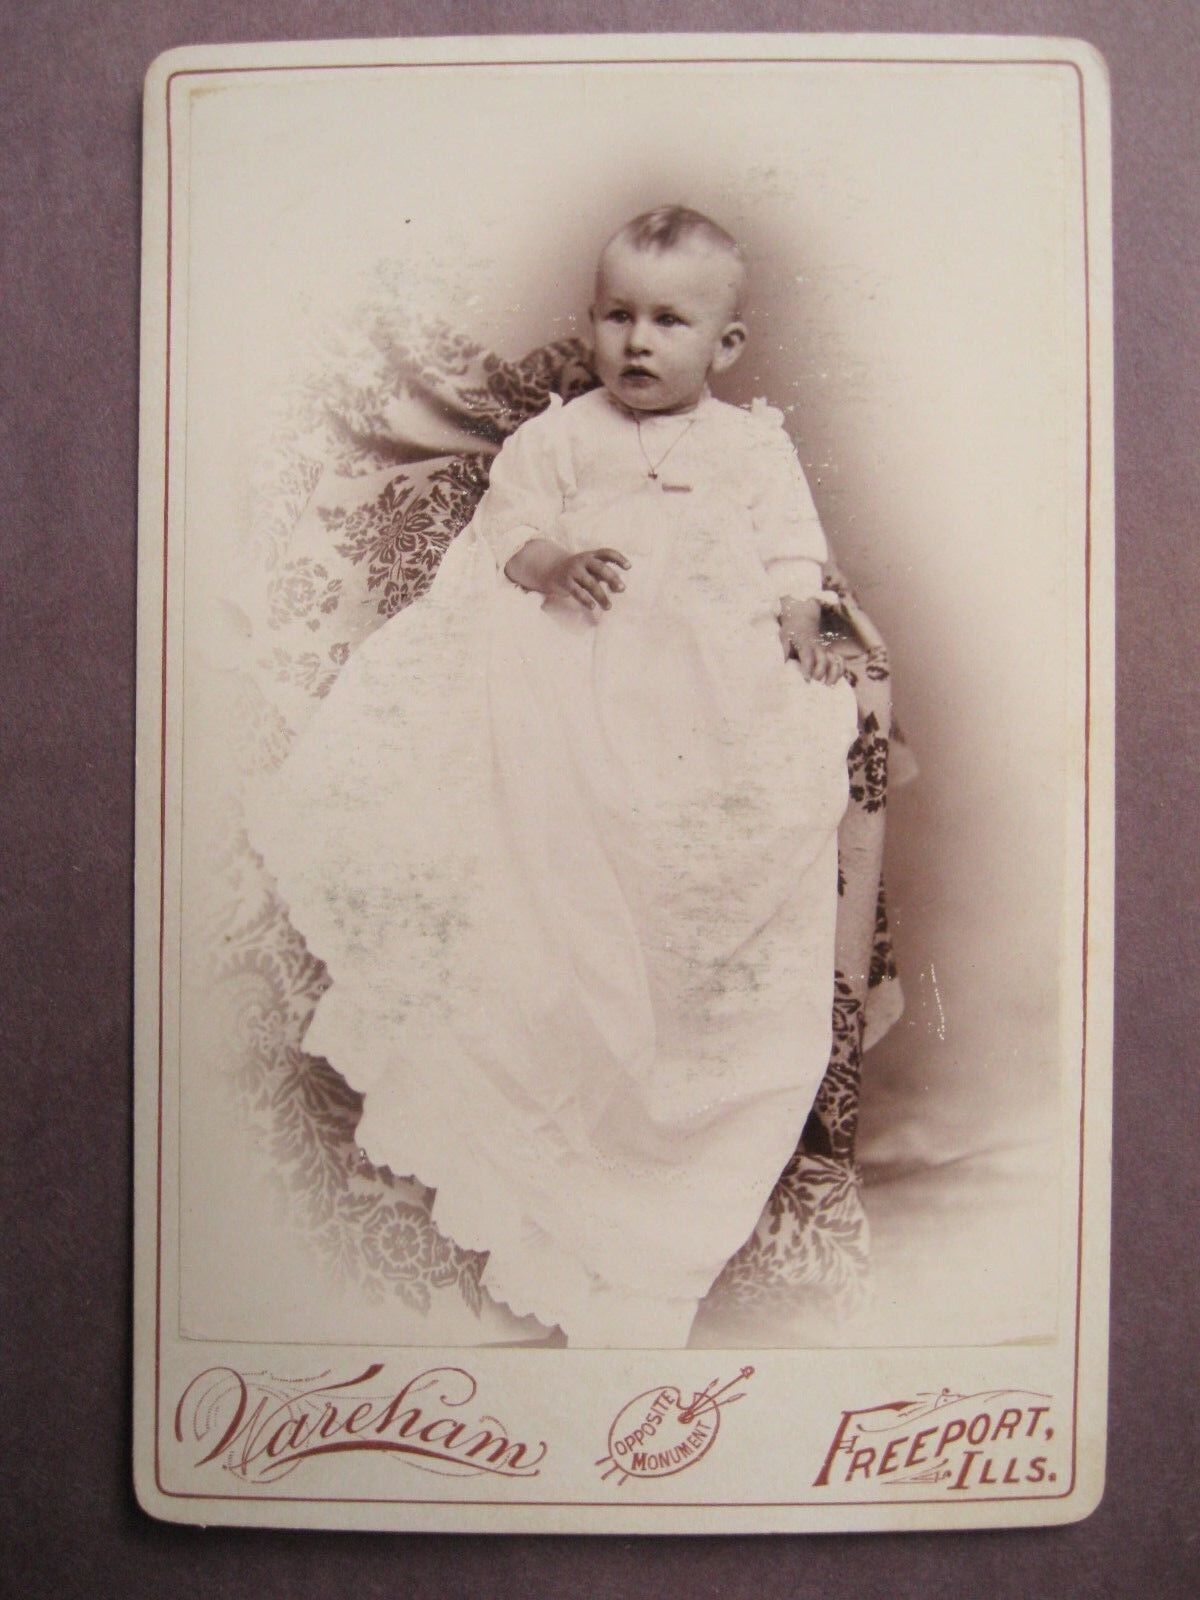 Vintage Cabinet Card Photo Victorian Young Child by Wareham from Freeport, IL.